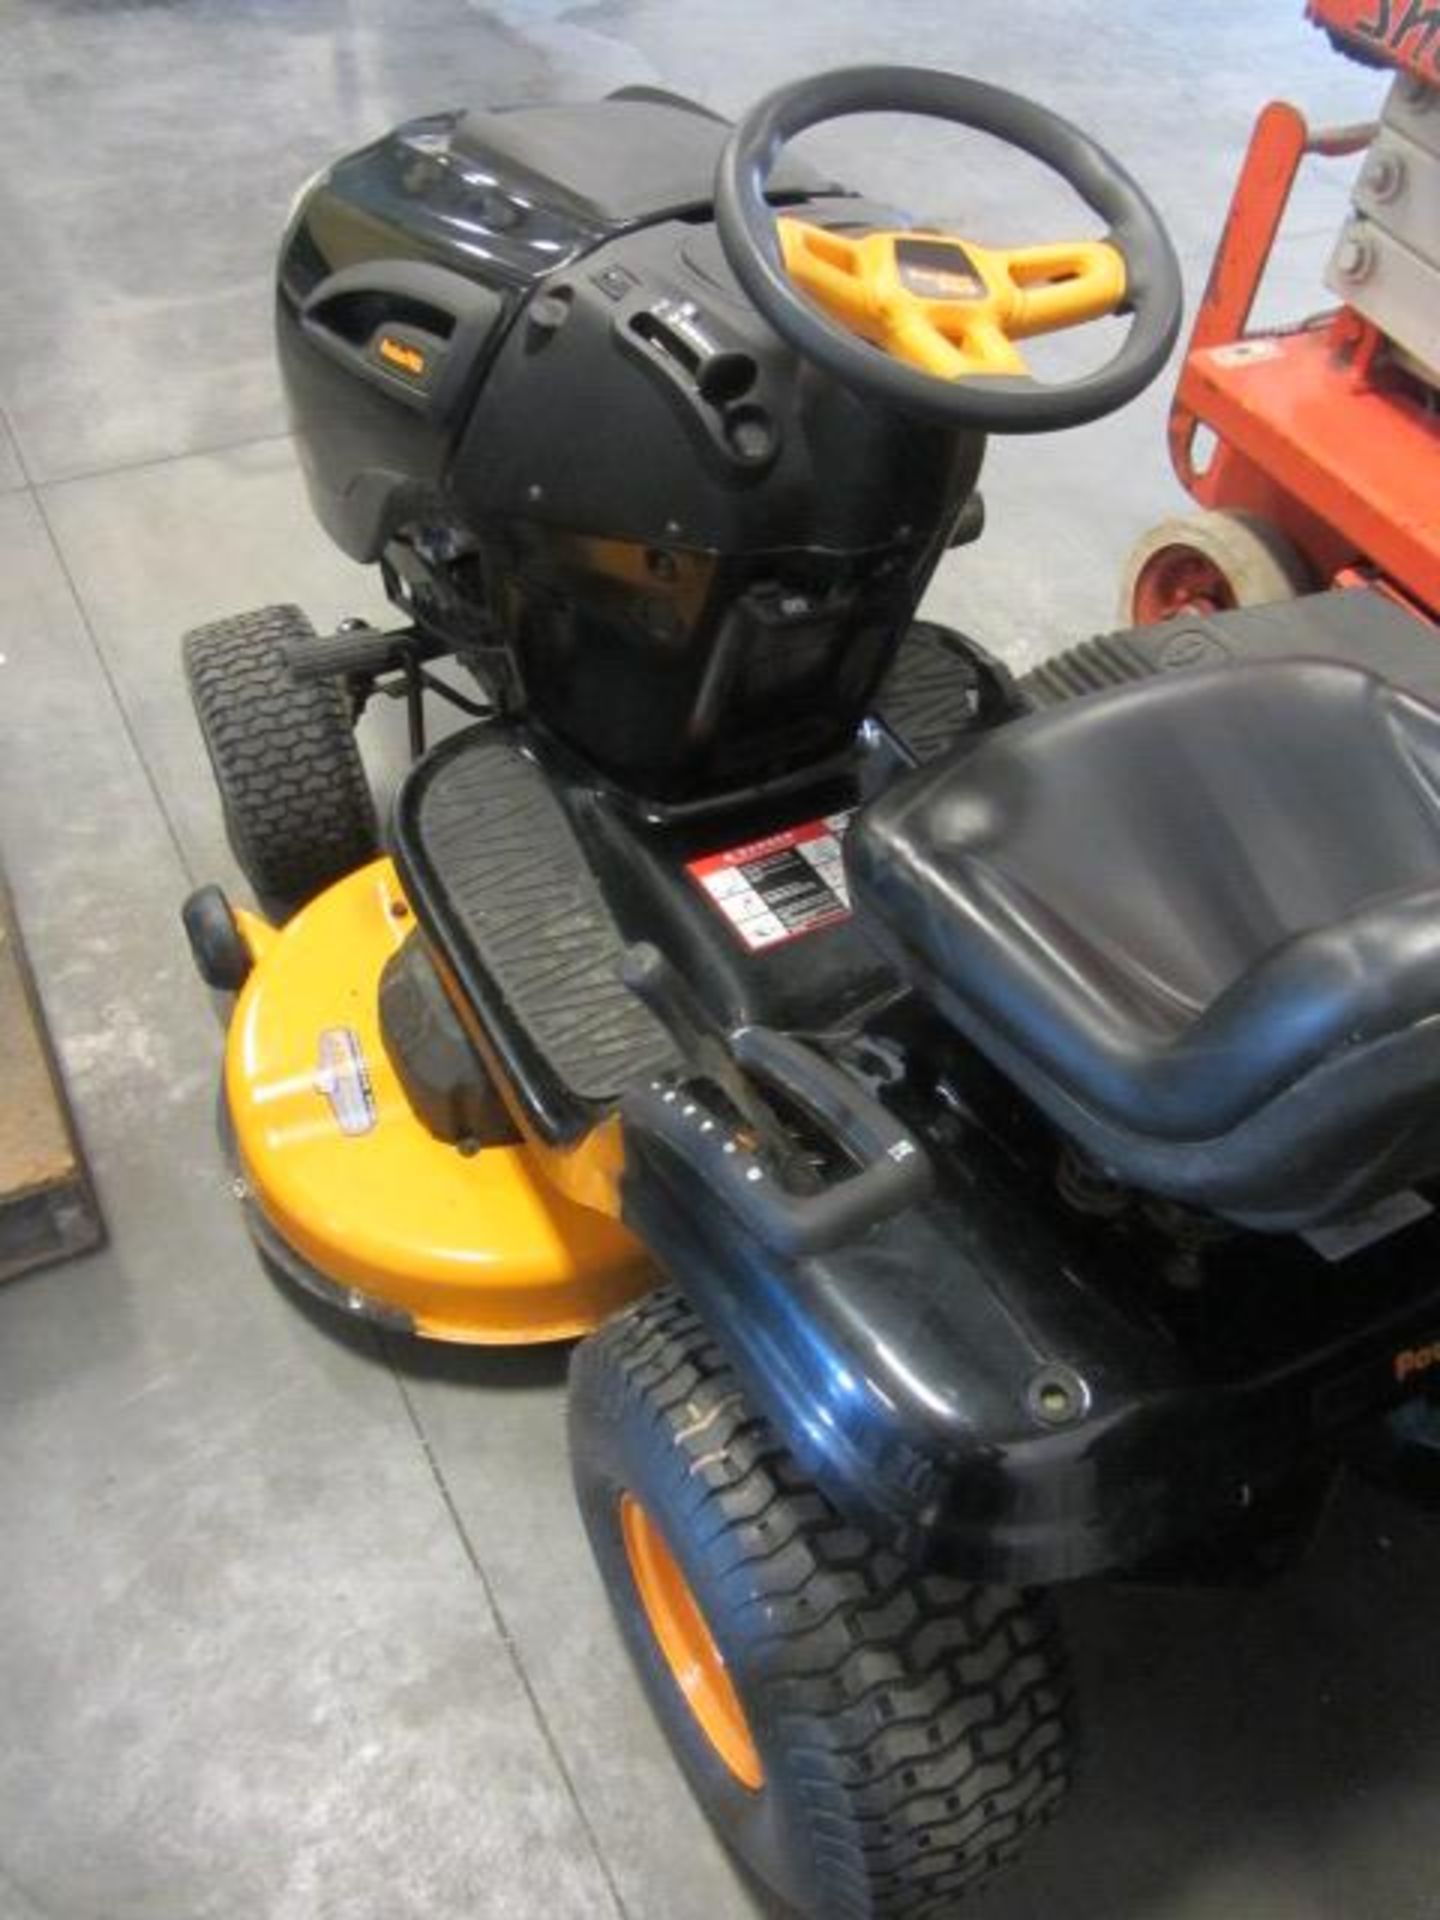 Poulan Pro 6-Stage Lawnmower with Dual Blade, Sidecatcher - Image 4 of 6